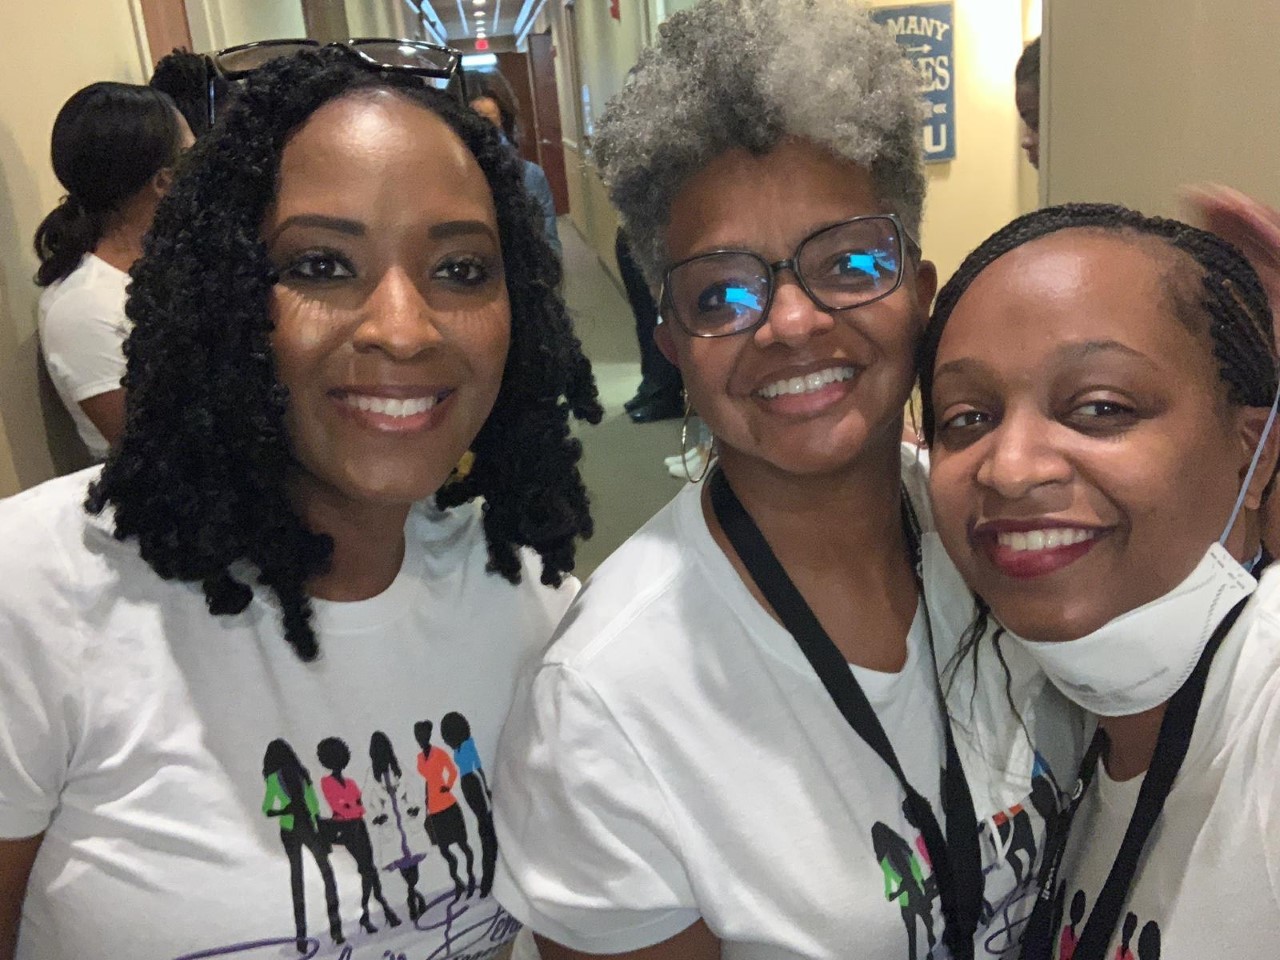 Dr. Karen Luckett, center, with Dr. Sharel Sly, left, and Dr. Misha Lockey at the Sistahs in Dentistry Does Nash at The Nash Institute, Huntersville, North Carolina, in August 2021.